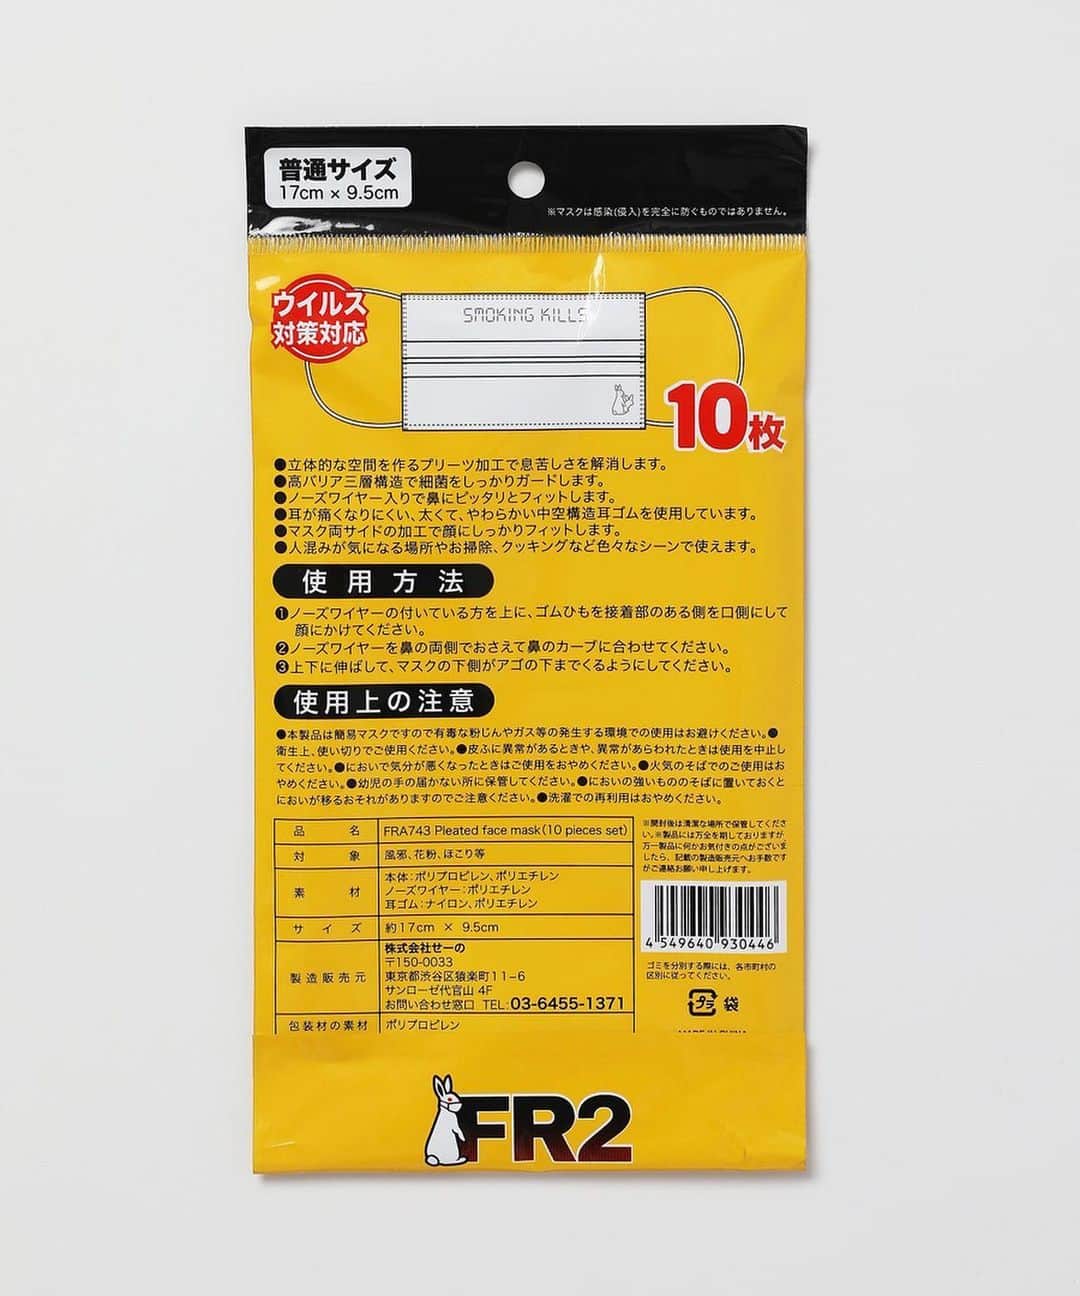 #FR2さんのインスタグラム写真 - (#FR2Instagram)「#FR2 has released original mask which is a single-use mask that can also be used for virus prevention. There are 10 pieces in the set and the outer surface of each mask is embossed with the SMOKING KILLS logo and icon. It is made as a simple yet stylish mask.  #FR2 からウイルス対策としても使用出来る使い切りタイプのオリジナルマスクが登場。 中は10枚セットになっていて一枚づつ表面にはSMOKING KILLSのロゴとアイコンを型押しで表現。シンプルながらお洒落な仕上がりのマスクです。  从#FR2 开始可作为防病毒口罩使用的原创口罩闪亮登场。 每盒10枚，每一枚口罩表面都有压花的SMOKING KILLS的logo和图标。是一款做工简朴美观的口罩。  #FR2 推出了款可對抗病毒的拋棄式獨家原創口罩。 一組 10 片裝，每一片的表面都有SMOKING KILLS的logo和圖標壓紋，樣式簡約又時髦。  #fxxkcoronavirus#mask#Facemask #FR2#fxxkingrabbits#頭狂色情兎」5月22日 20時37分 - fxxkingrabbits